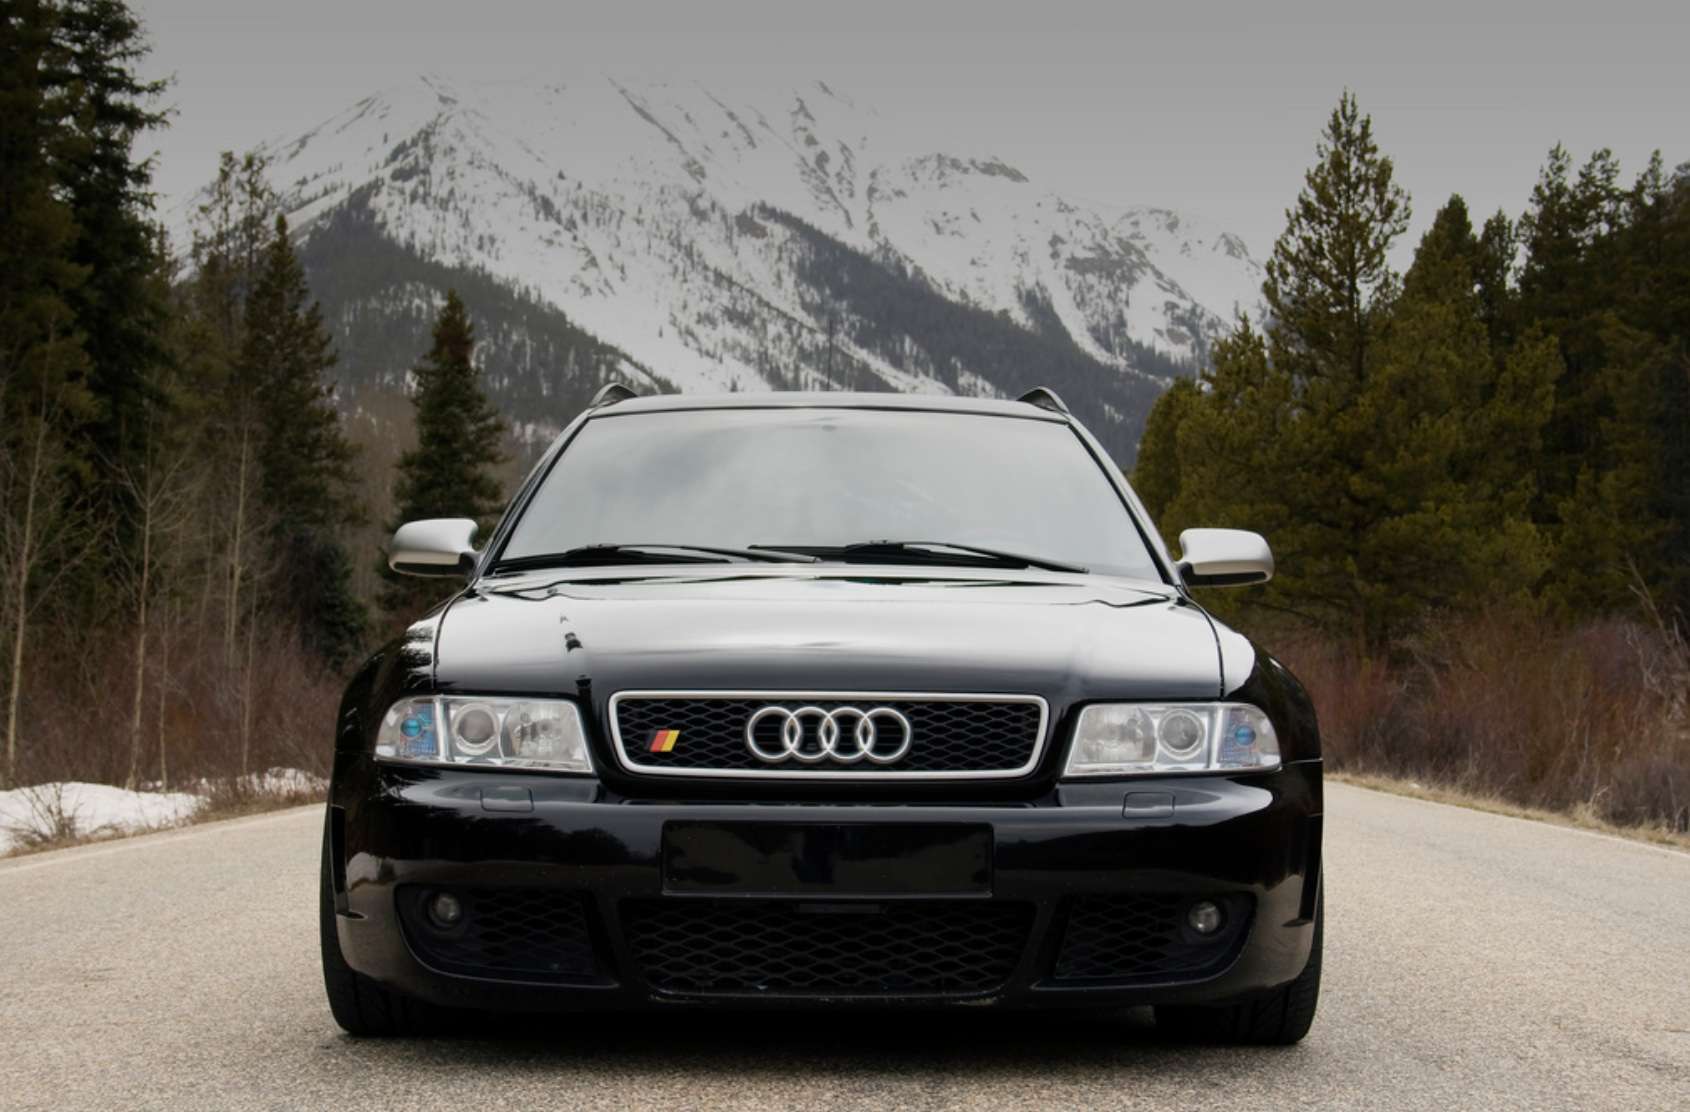 Audi A4 B5 Wallpaper Image On Genchi Info Mobile Cityconnectapps